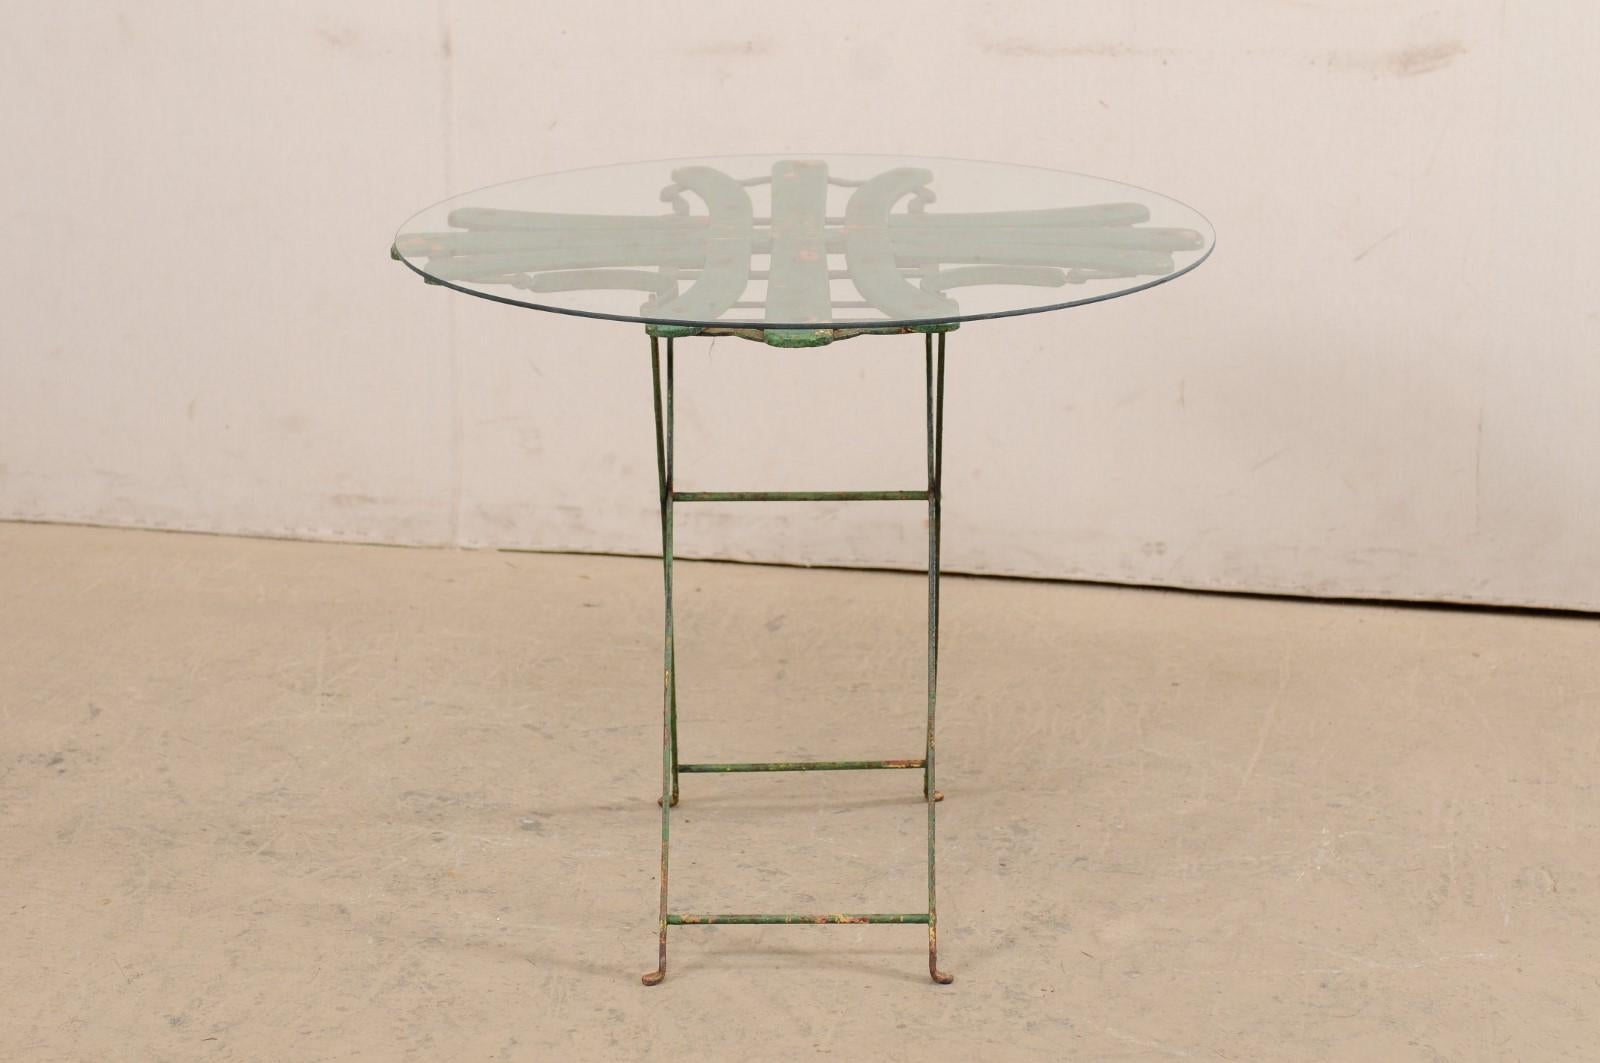 French Bistro Table with Uniquely-Designed Wood Top, Glass over 3